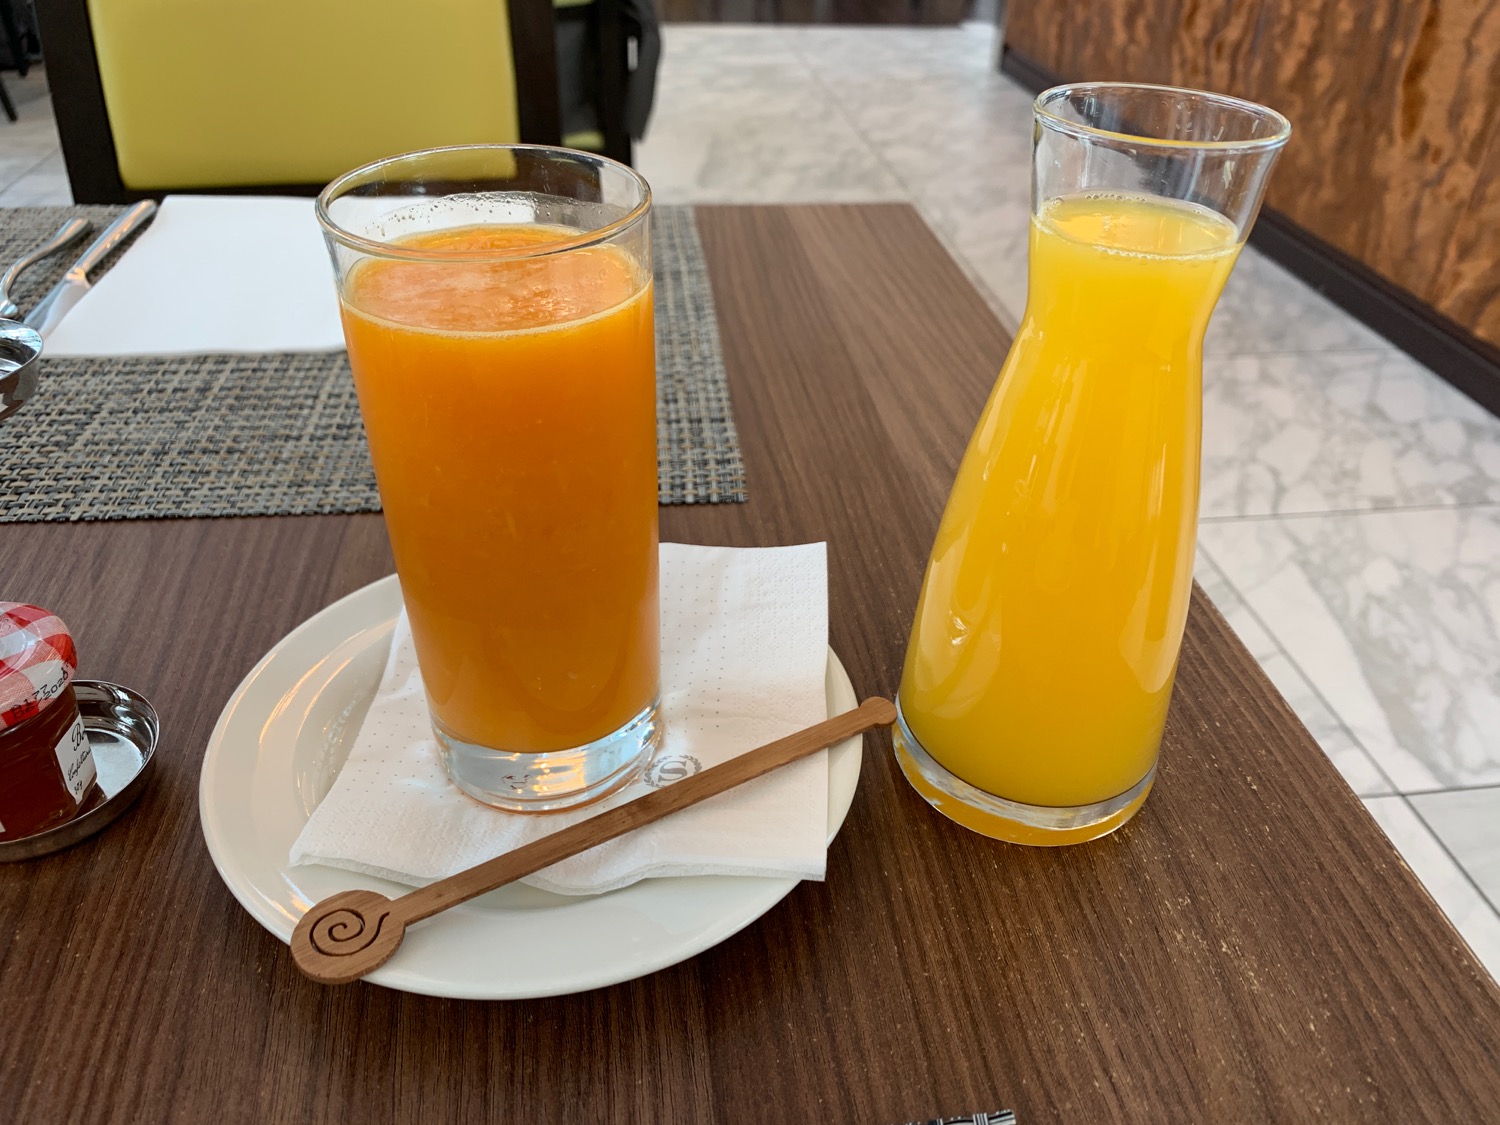 a glass of orange juice and a bottle of orange juice on a plate